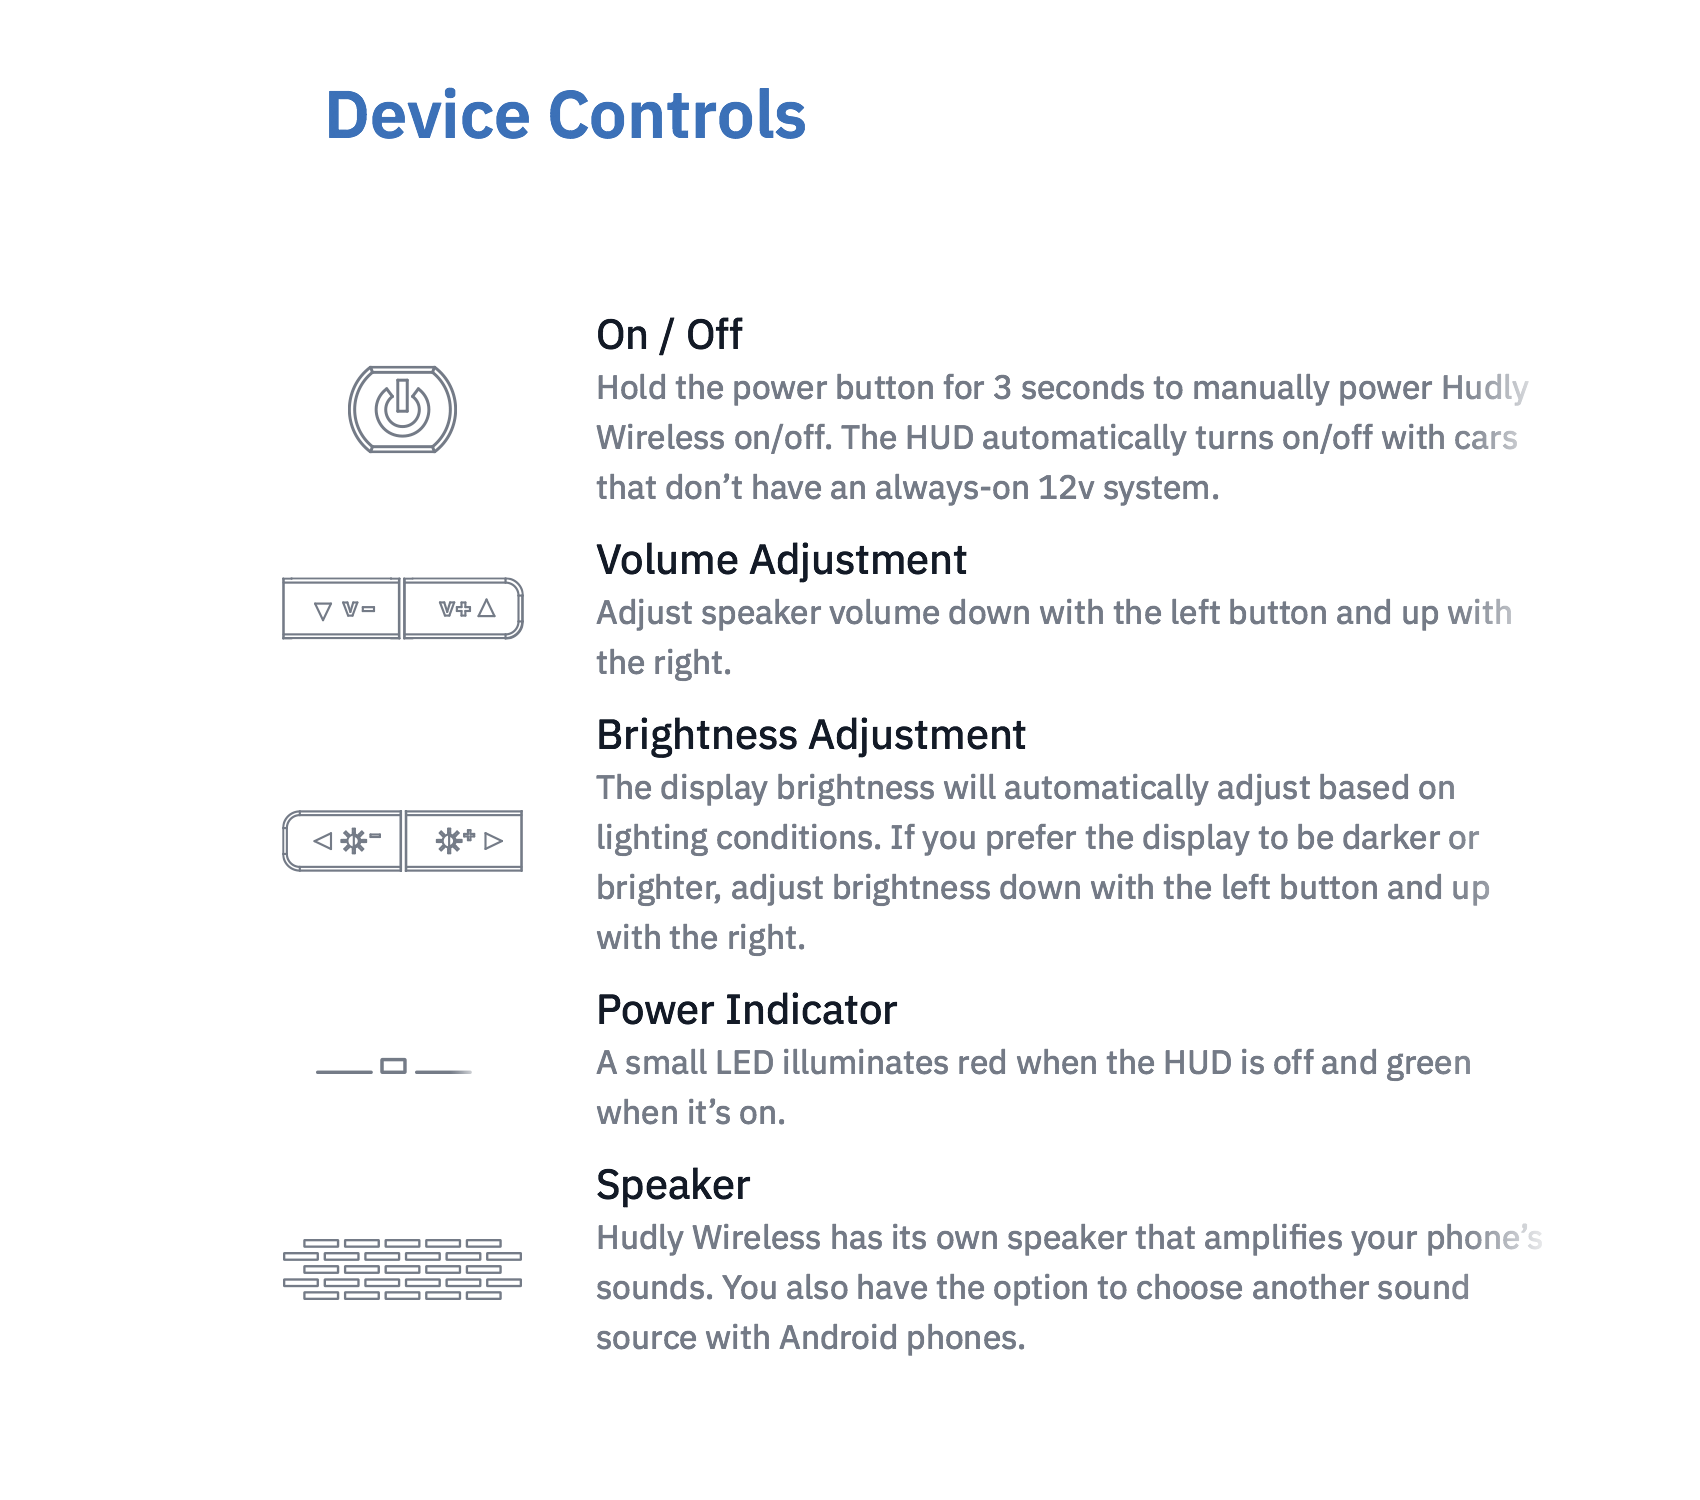 devicecontrols.png